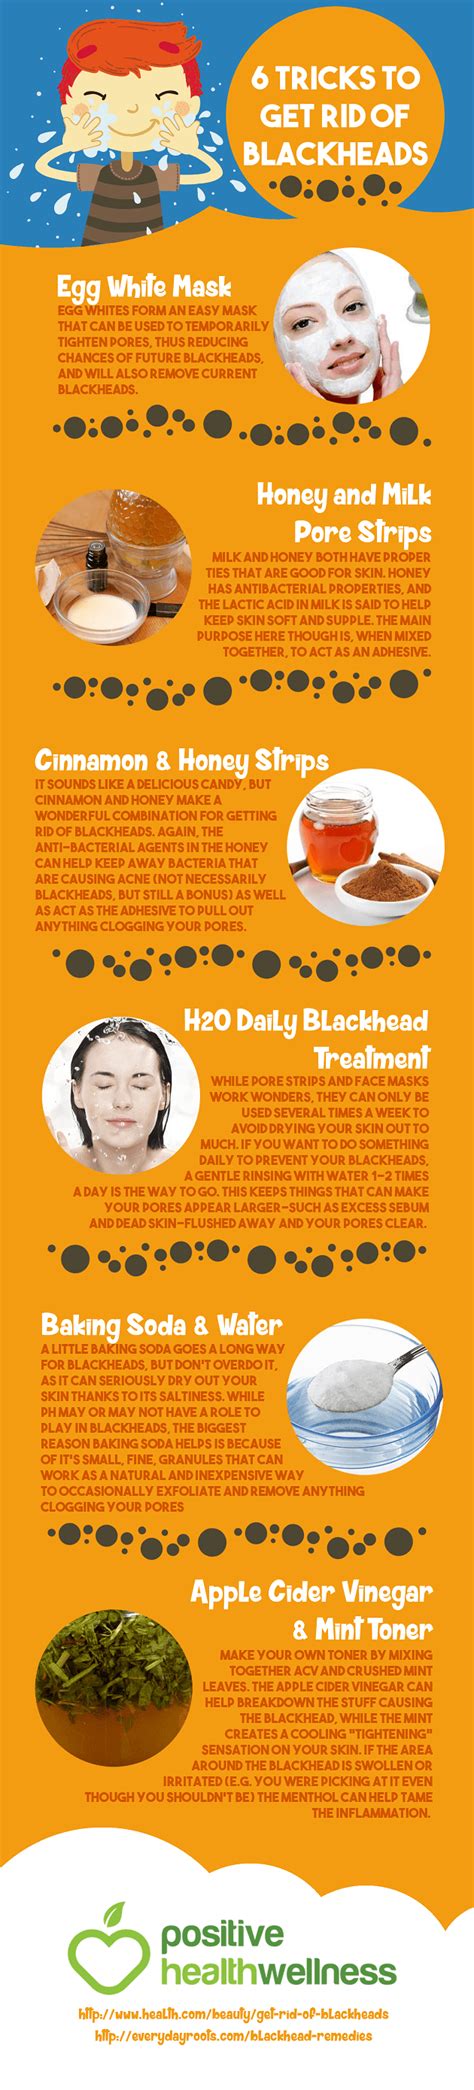 6 Tricks To Get Rid Of Blackheads Infographic